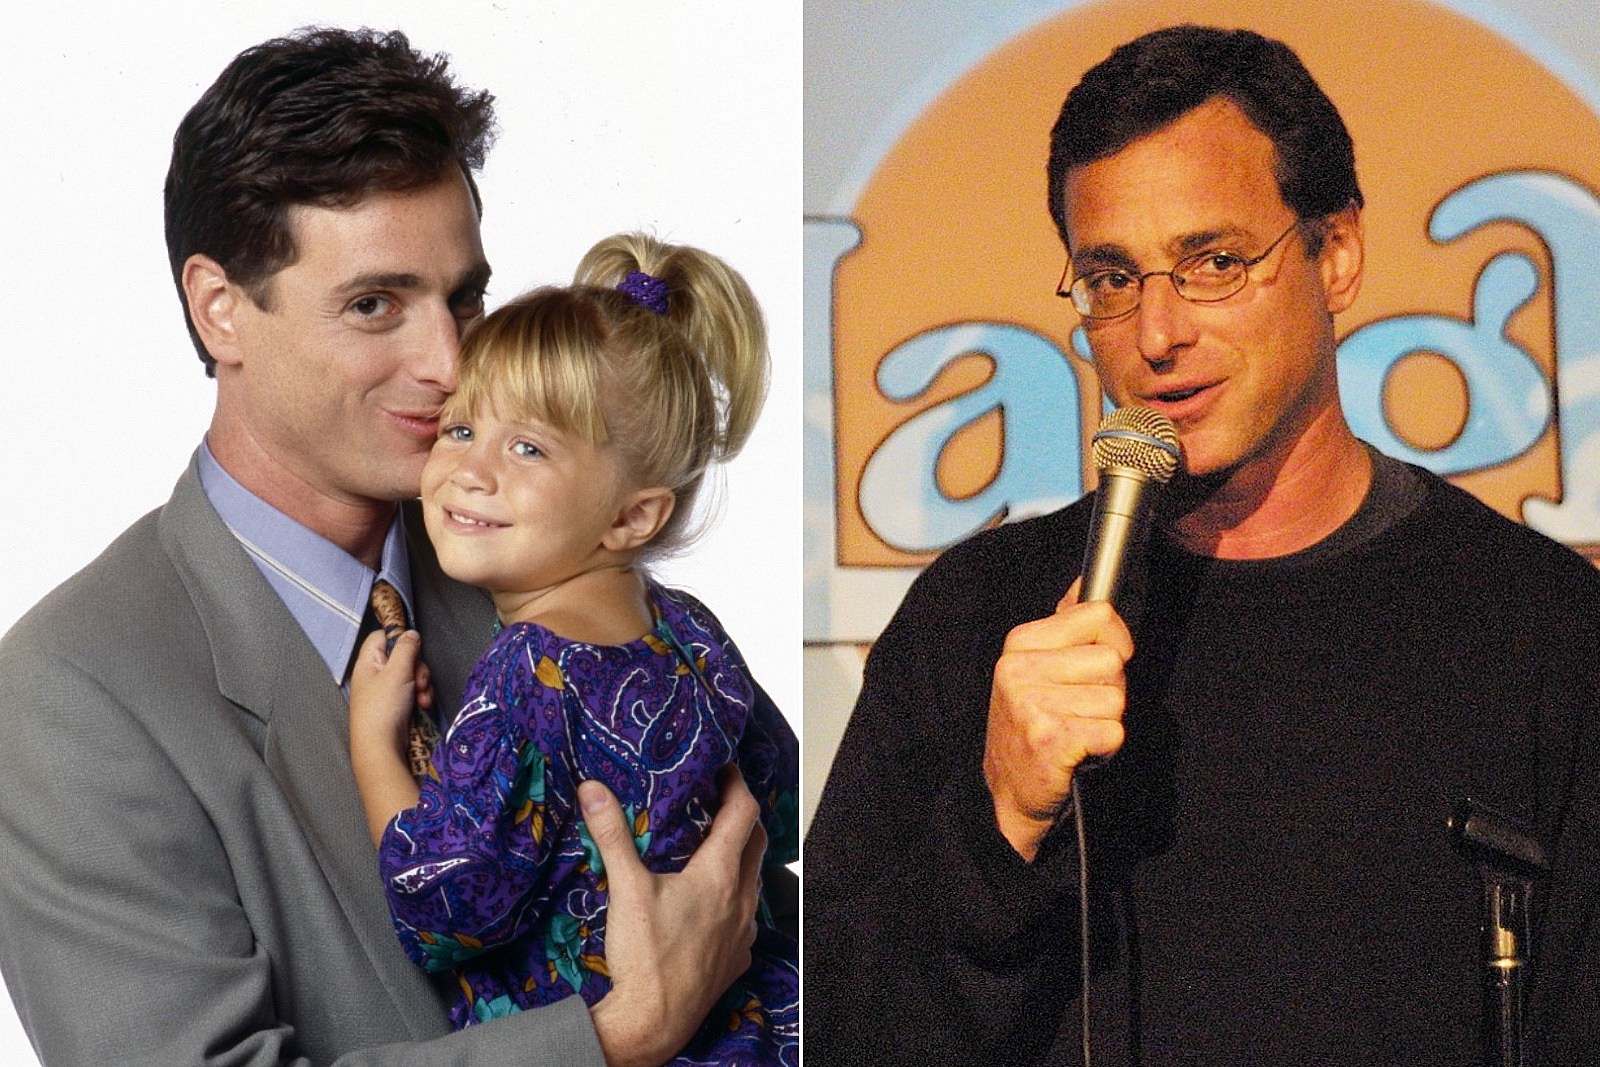 How Bob Saget Balanced Family Comedy and Filthy Stand-Up